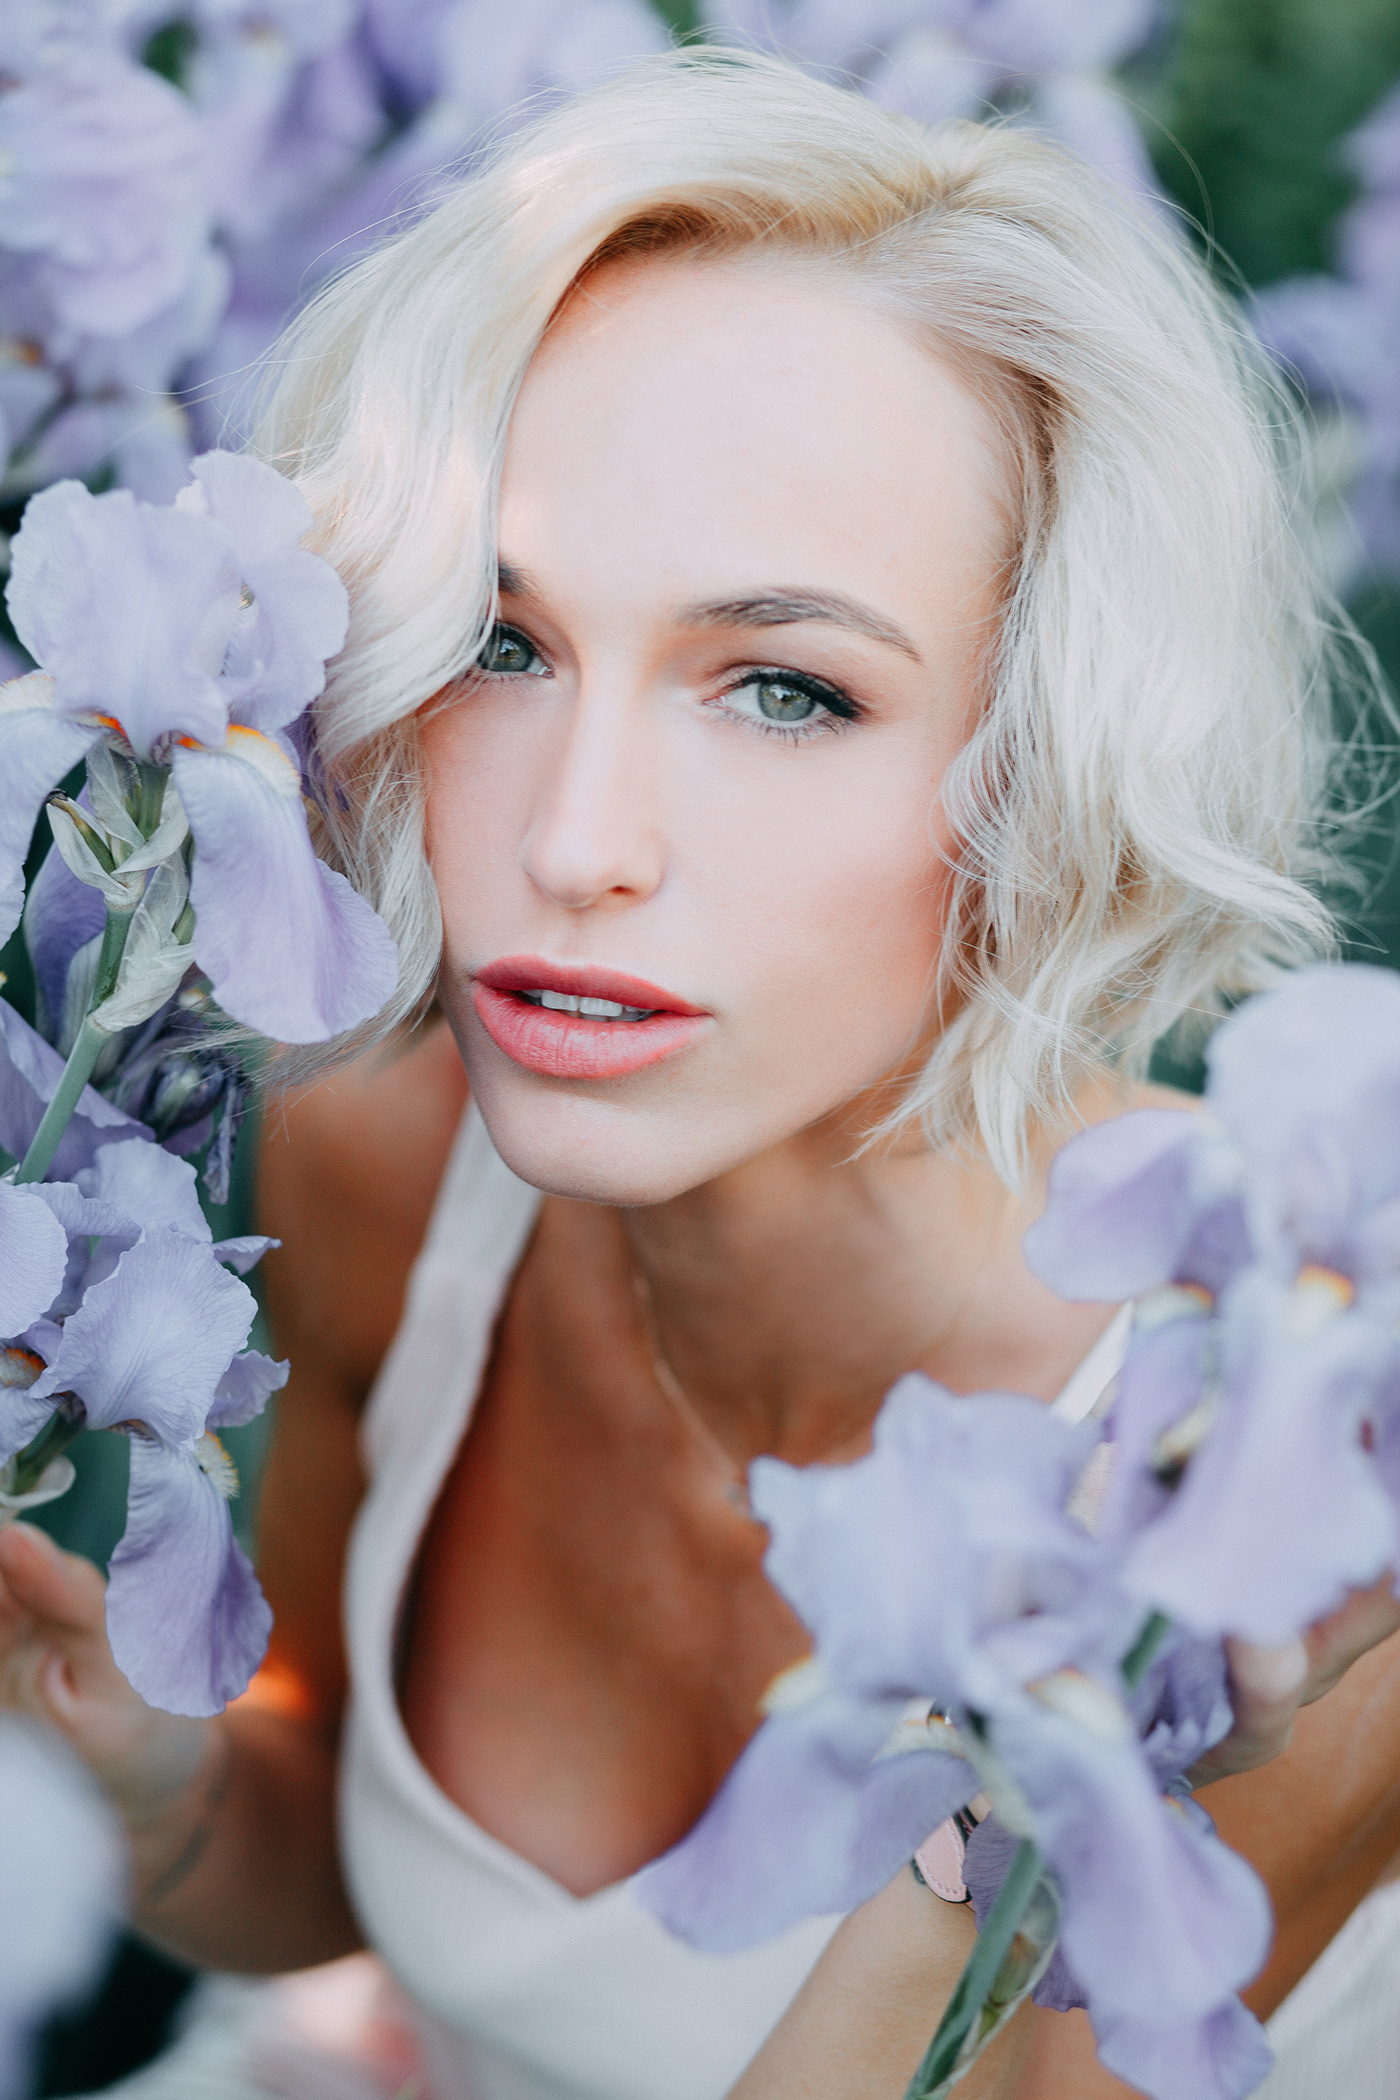 youth beauty pure nature beauty Blue Eyes blond girl Flowers summer Leasure violet flowers